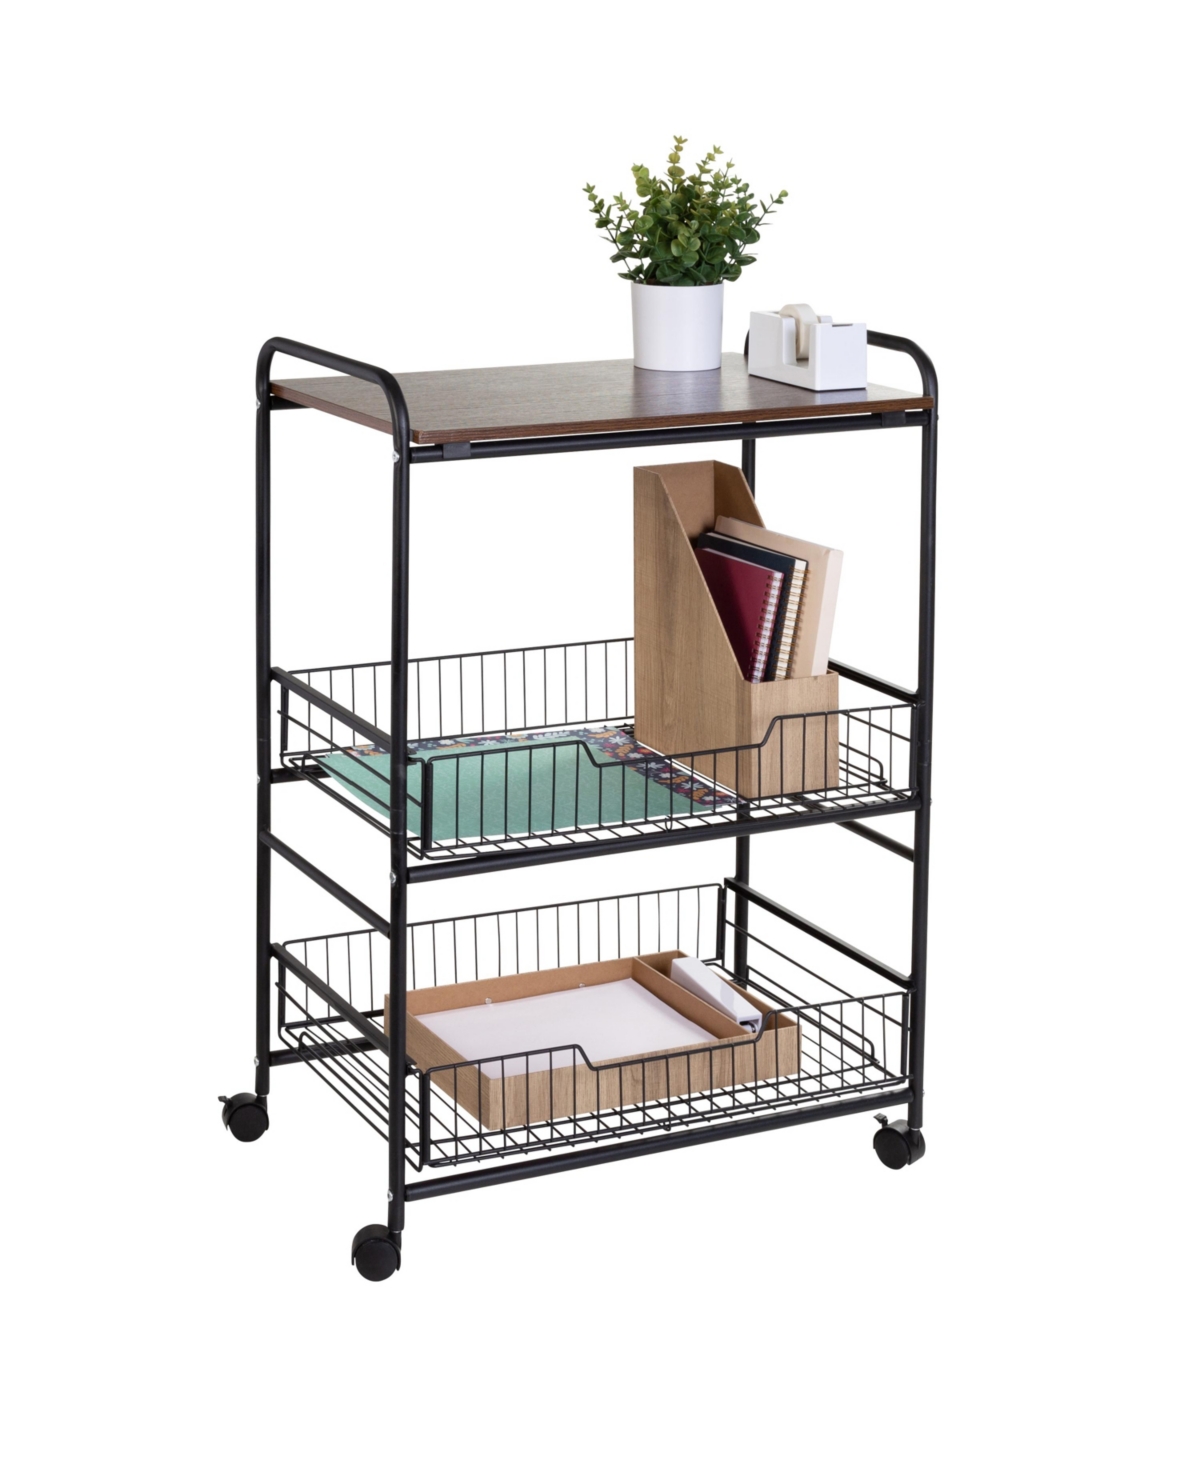 Shop Honey Can Do 3 Tier Wood Shelf And Pull-out Baskets Rolling Cart In Black